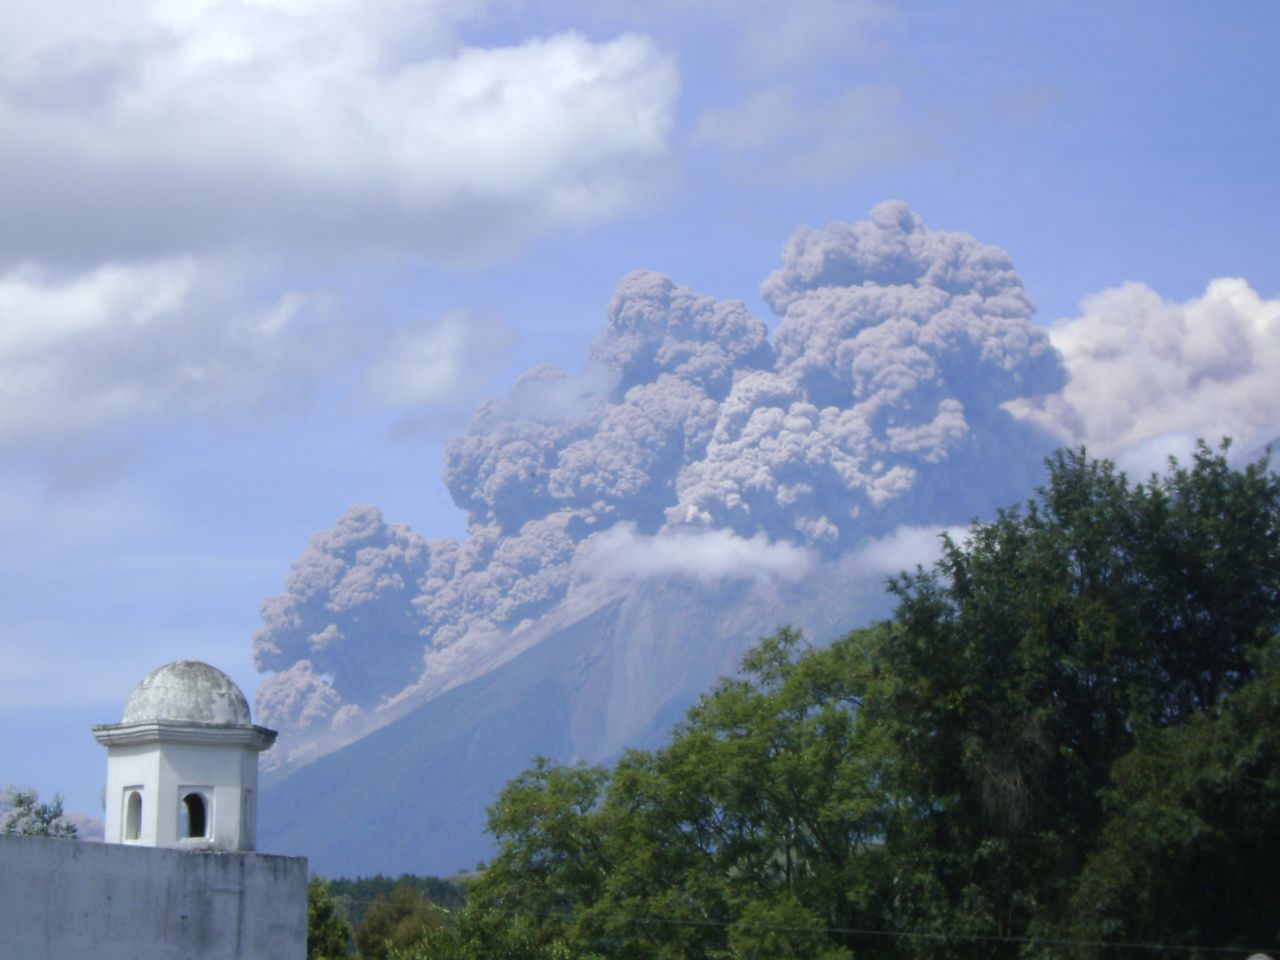 Fuego Volcano spewed ash into the air in <a href="http://ireport.cnn.com/docs/DOC-841218">Antigua, Guatemala</a>, shortly after it erupted in September. Photographer Jennifer Rowe said, "People who have lived here for more than 20 years have told me this is the biggest eruption they've ever seen."